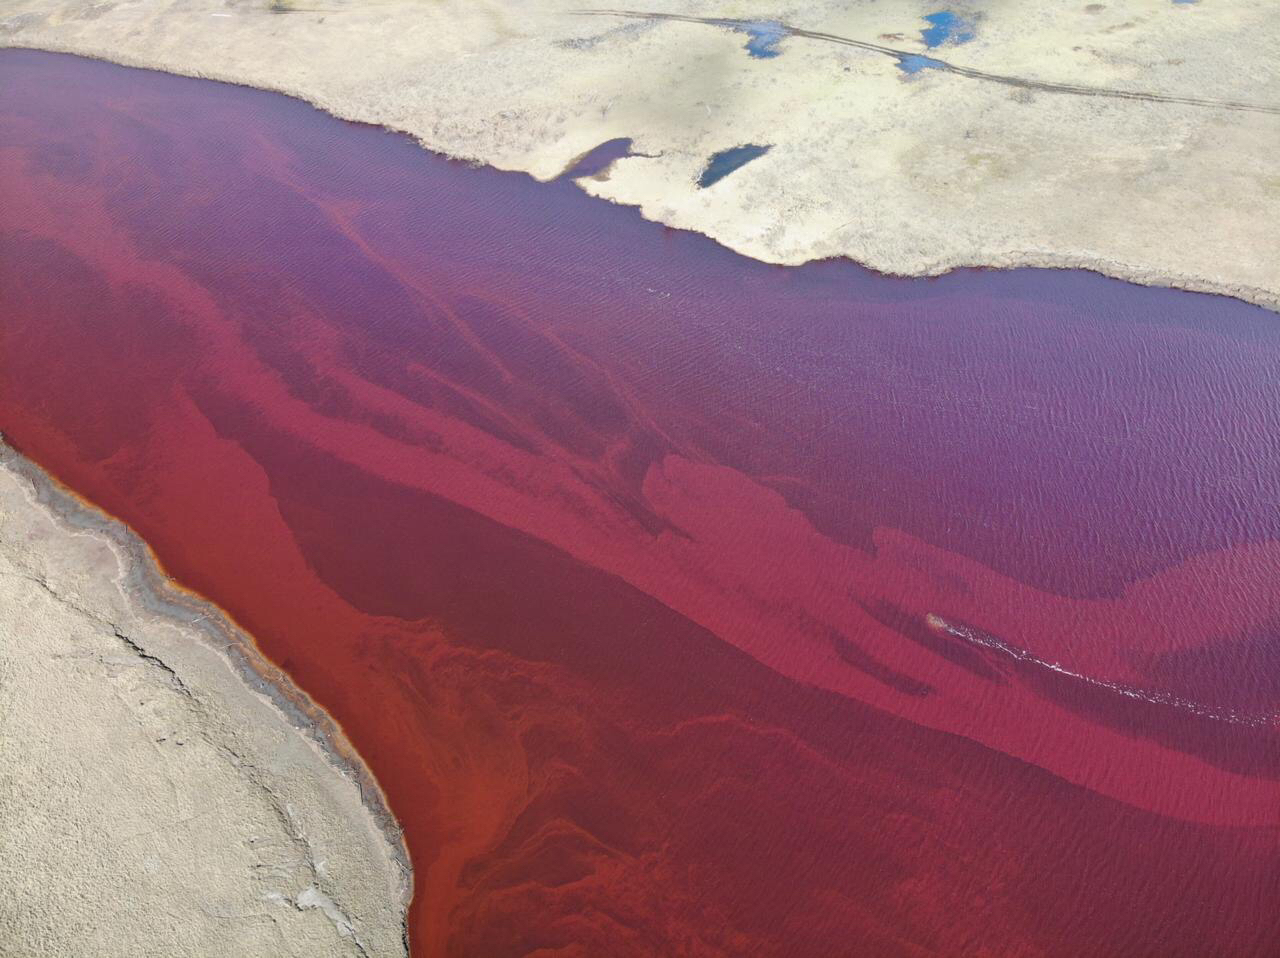 Spilled fuel products near Norilsk, flowing toward the Pyasina river. © Anonymous / Greenpeace